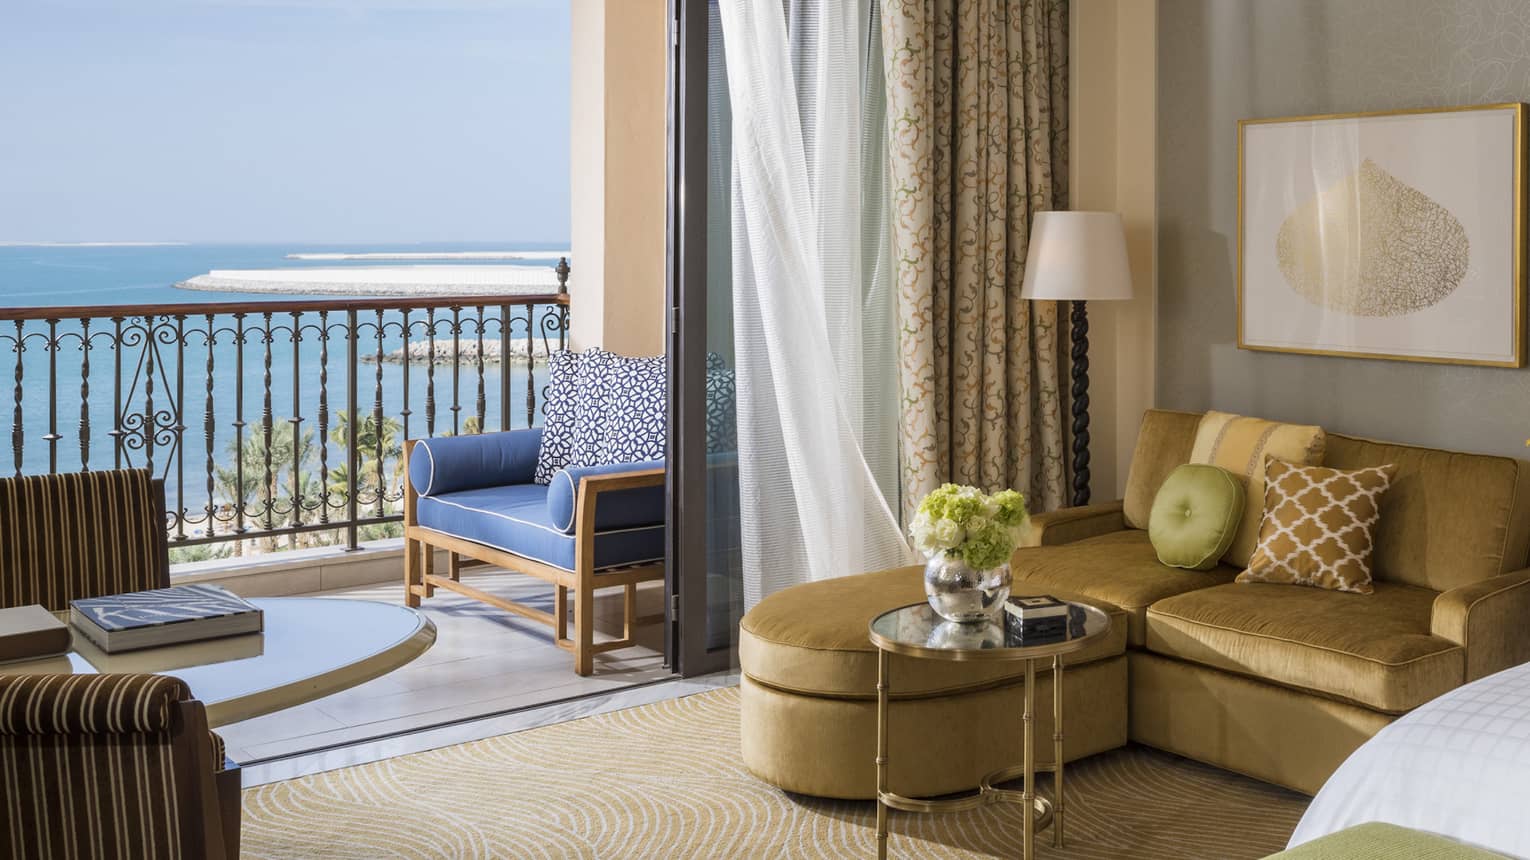 luxury hotel room with elegant decor and sea view